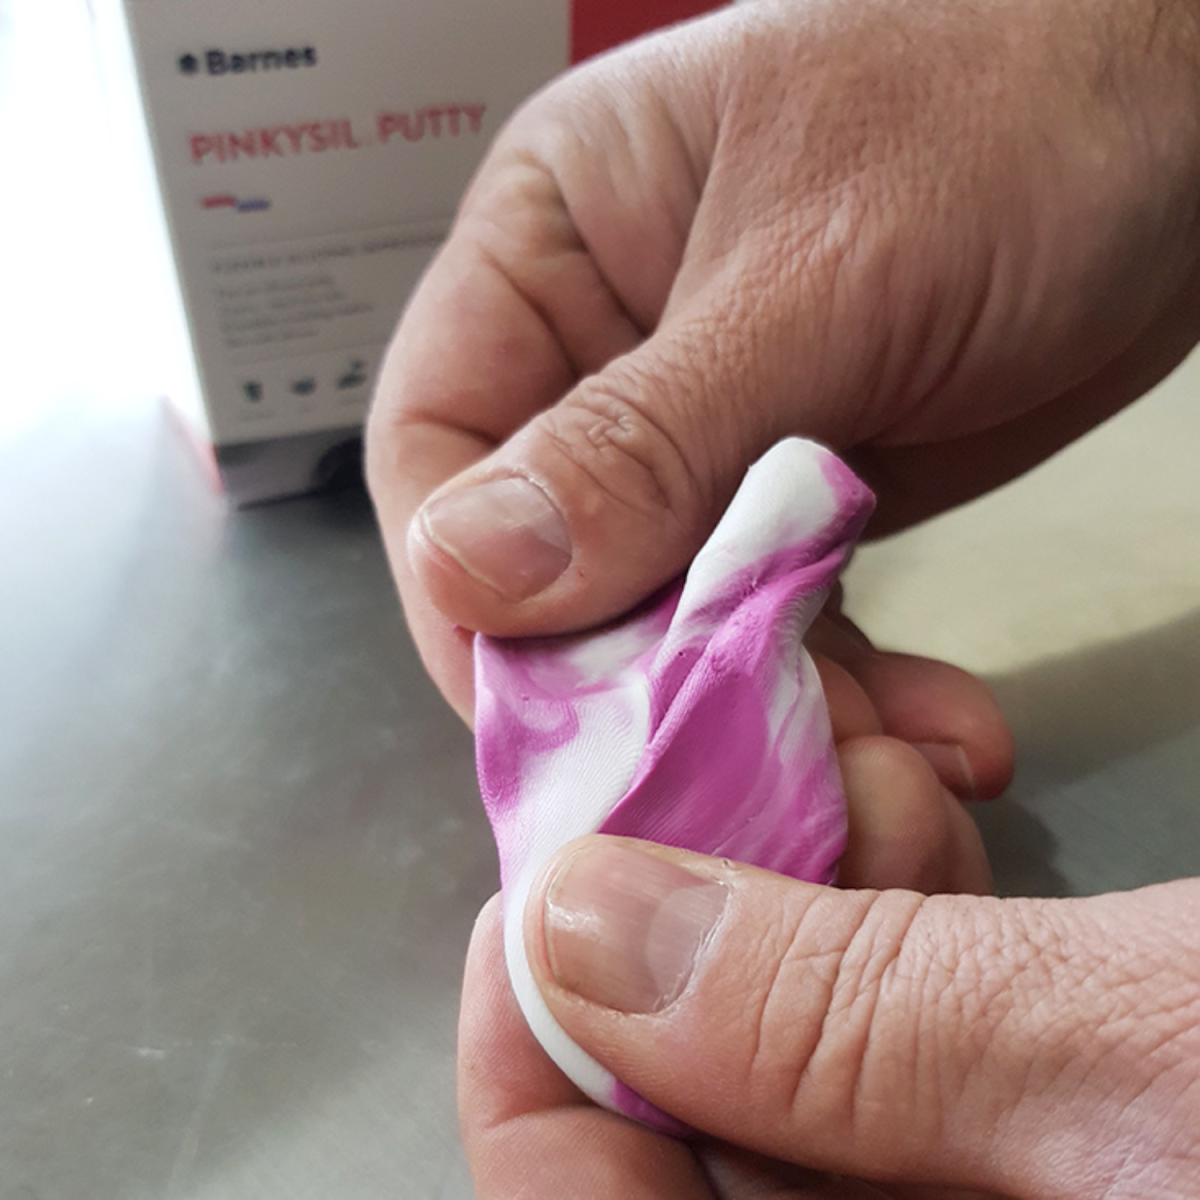 Pinkysil Putty Silicone Rubber